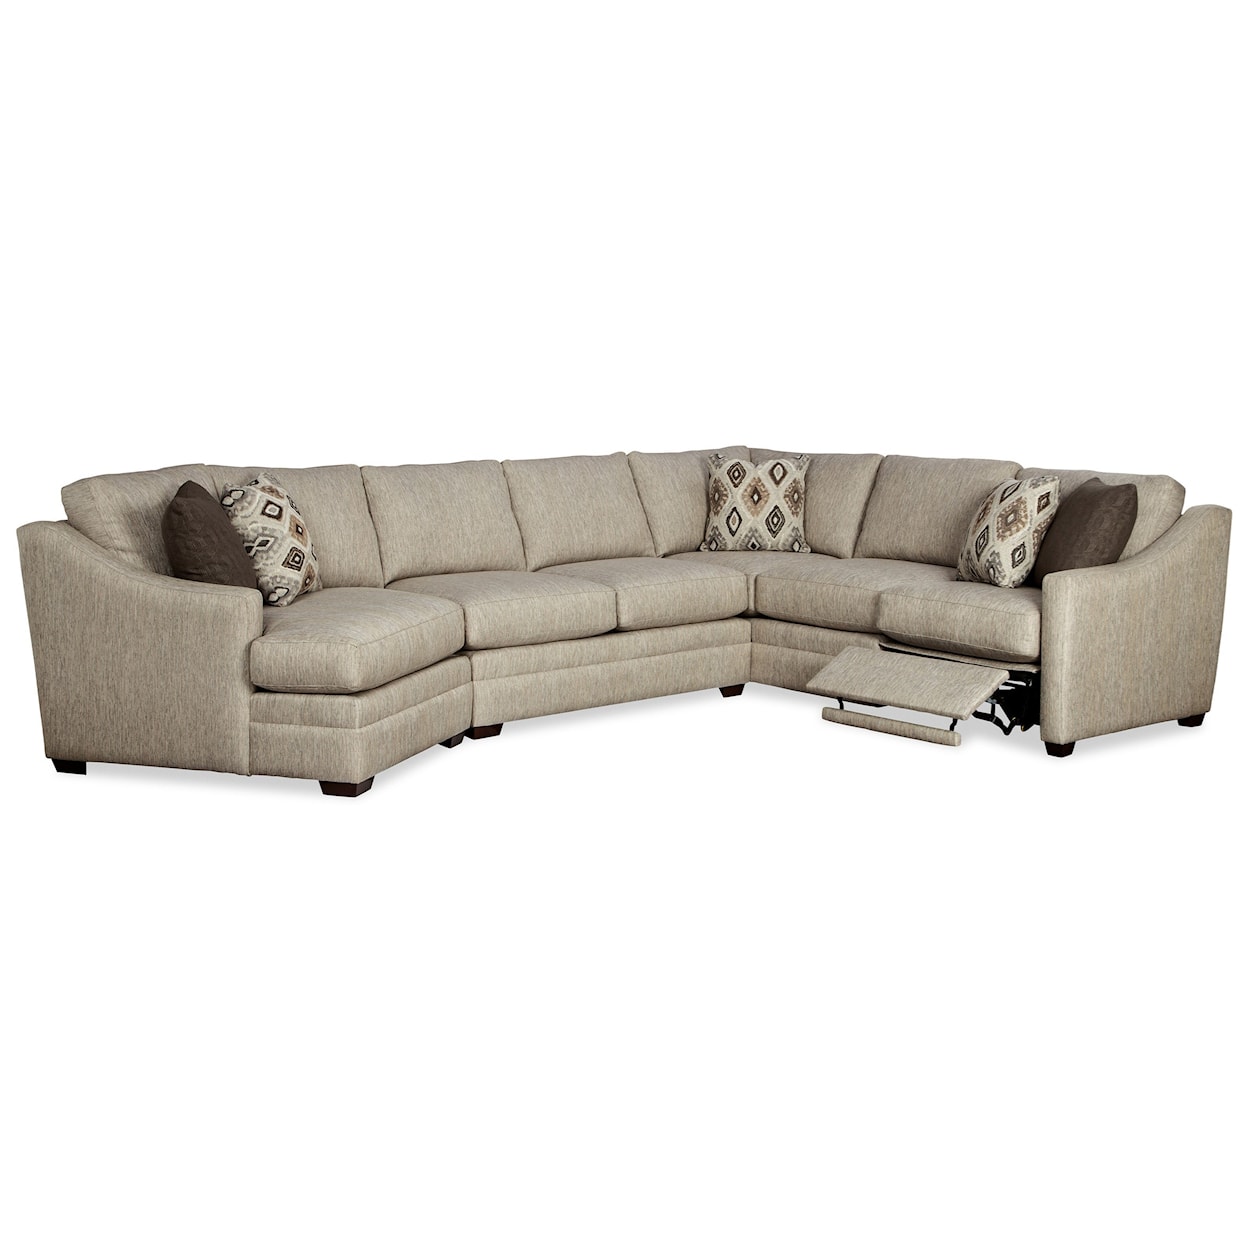 Hickory Craft F9 Series 3 Pc Sectional Sofa w/ RAF Recliner